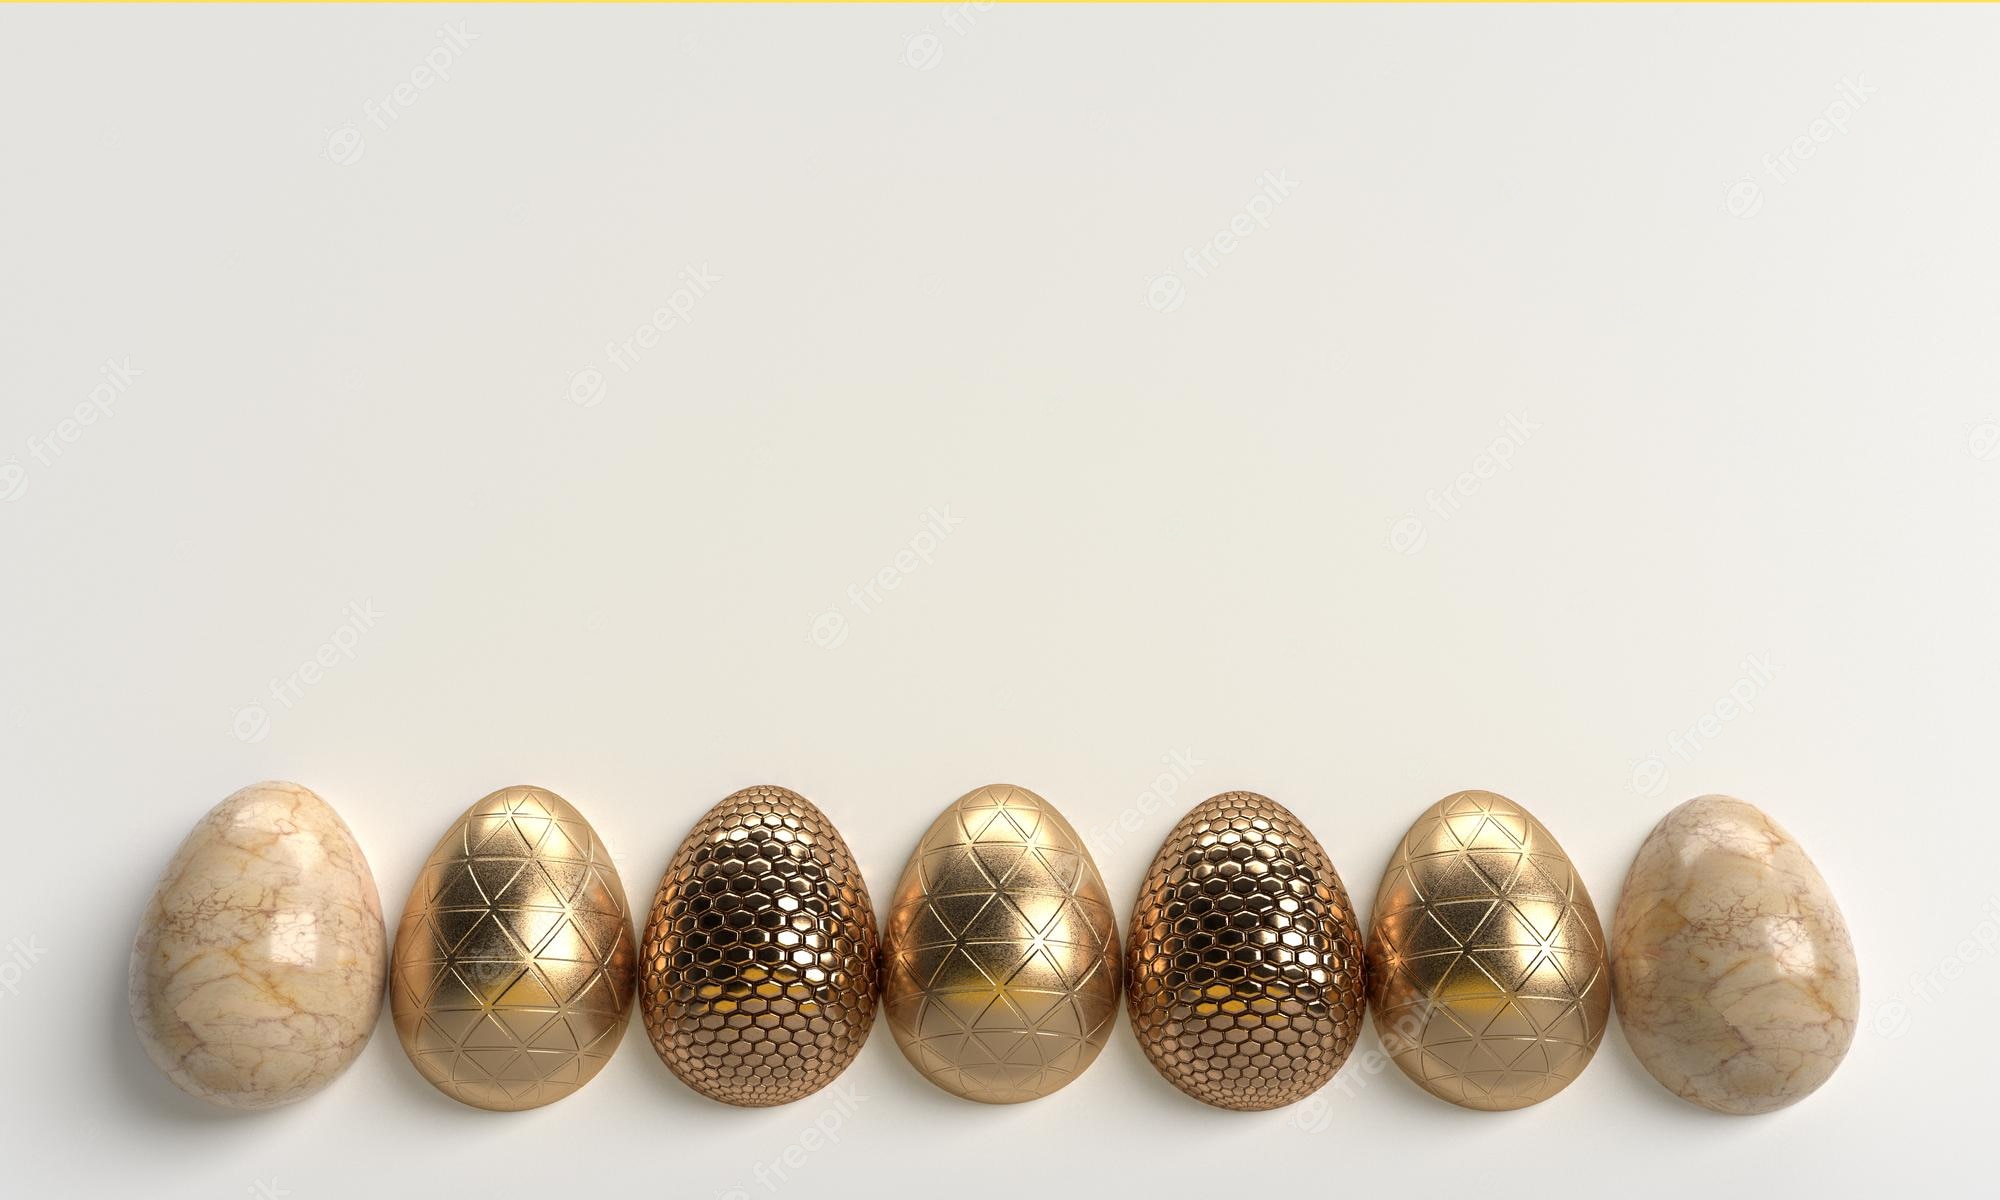 Premium Photo. Collection group easter egg bunny rabbit golden yellow orange white abstract background wallpaper copy space empty decoration ornament springtime april greeting season religion vintage3D render